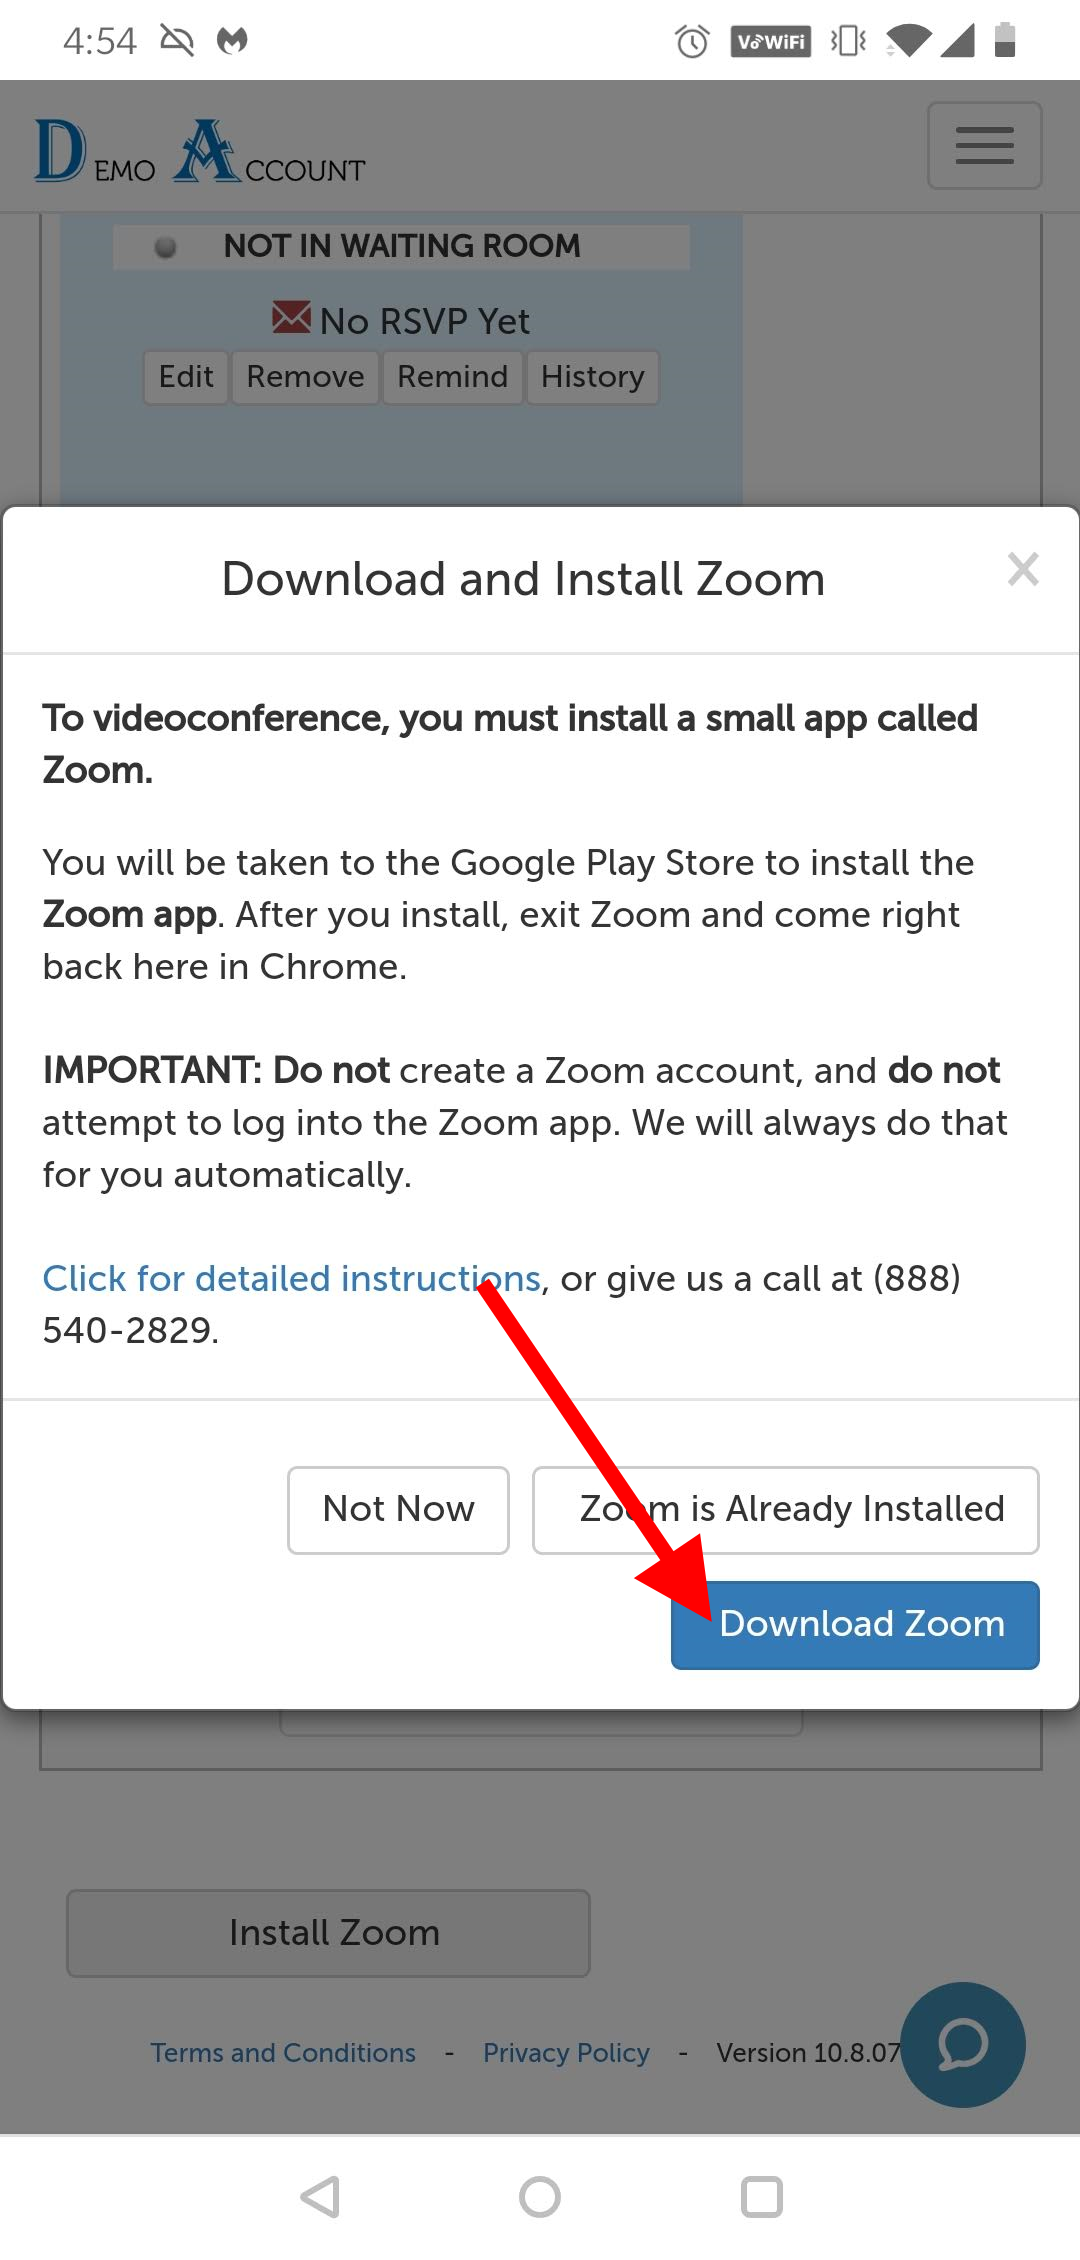 Download and Install Zoom message